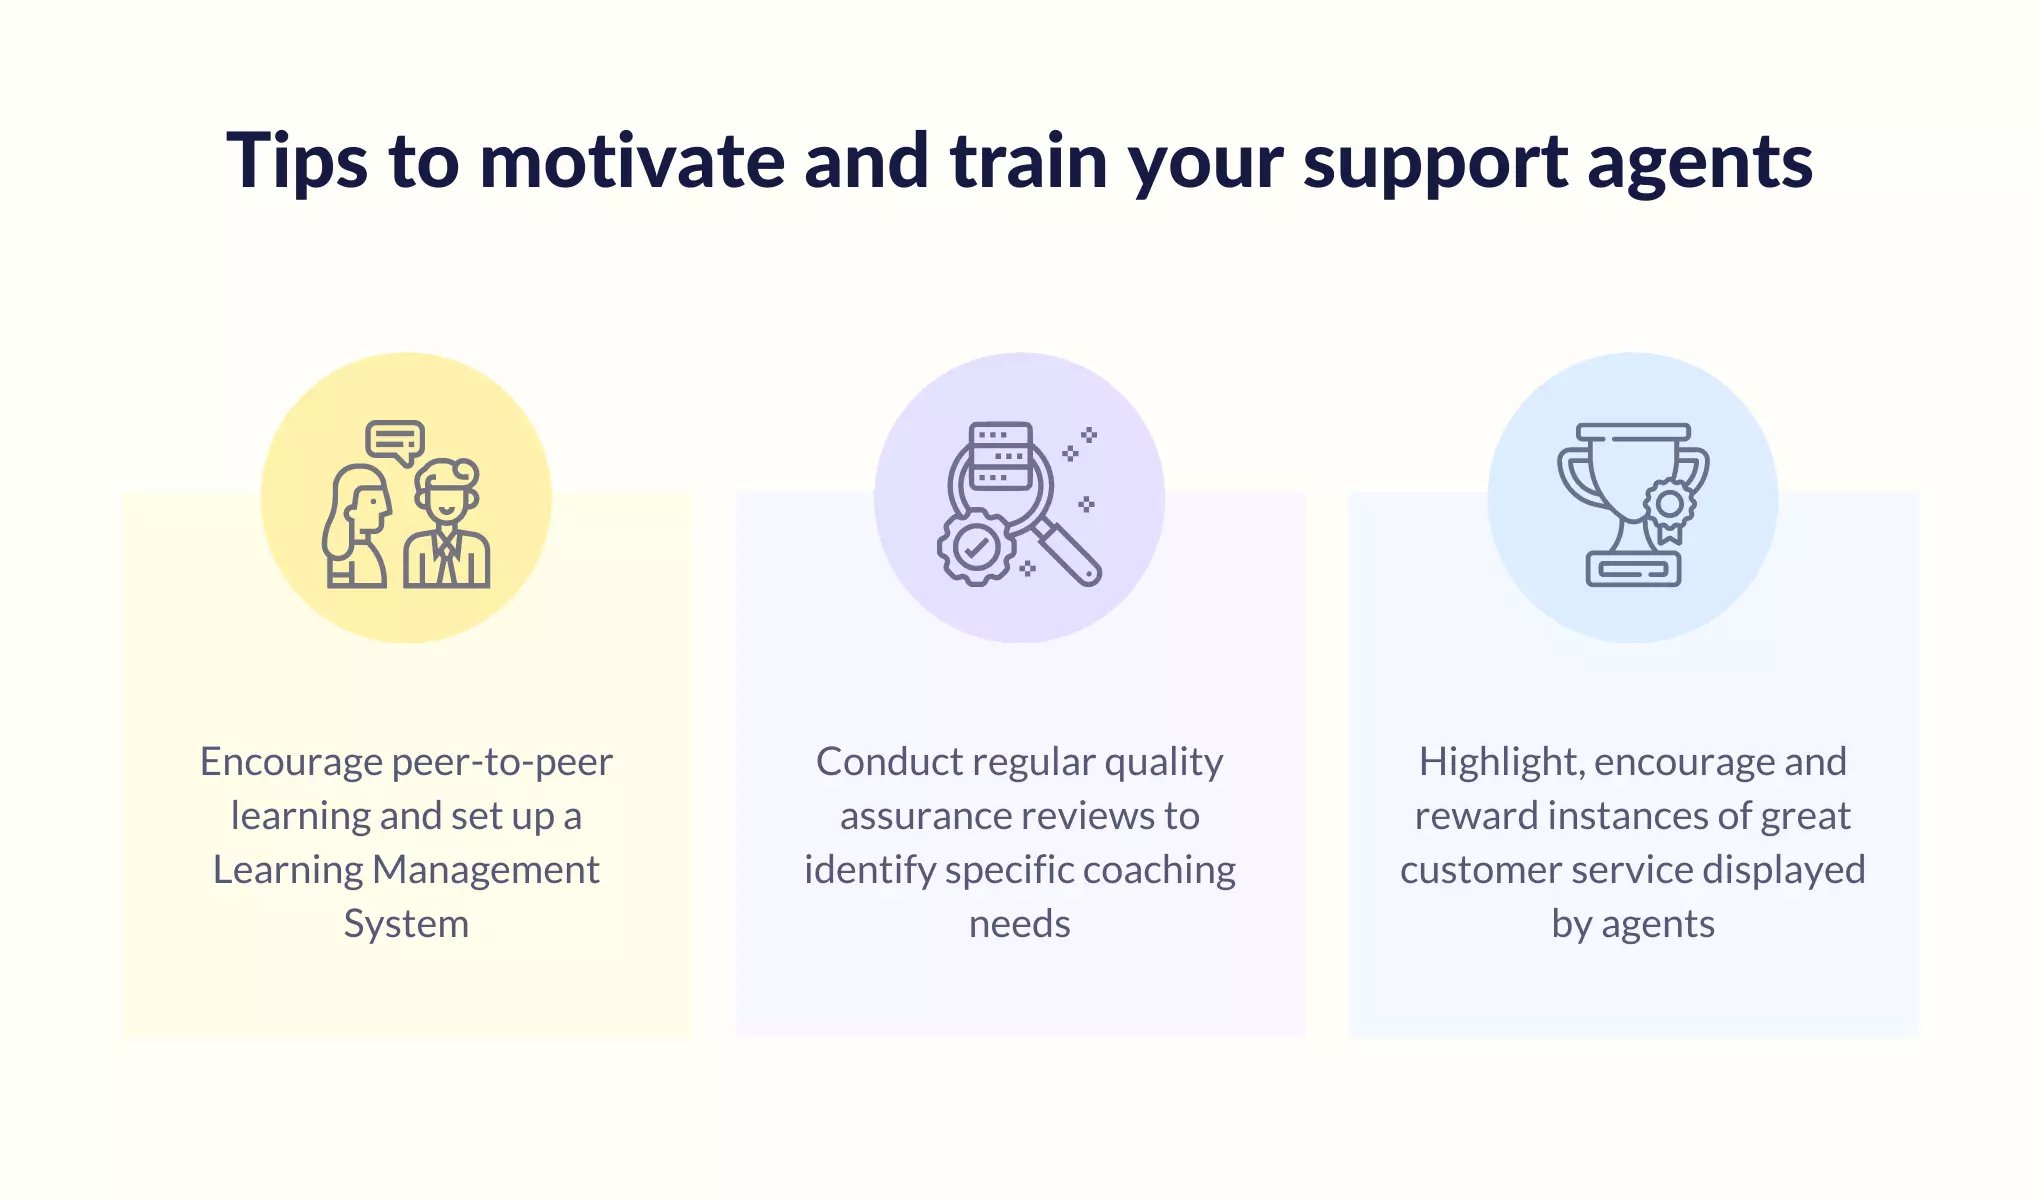 Motivate and train support agents